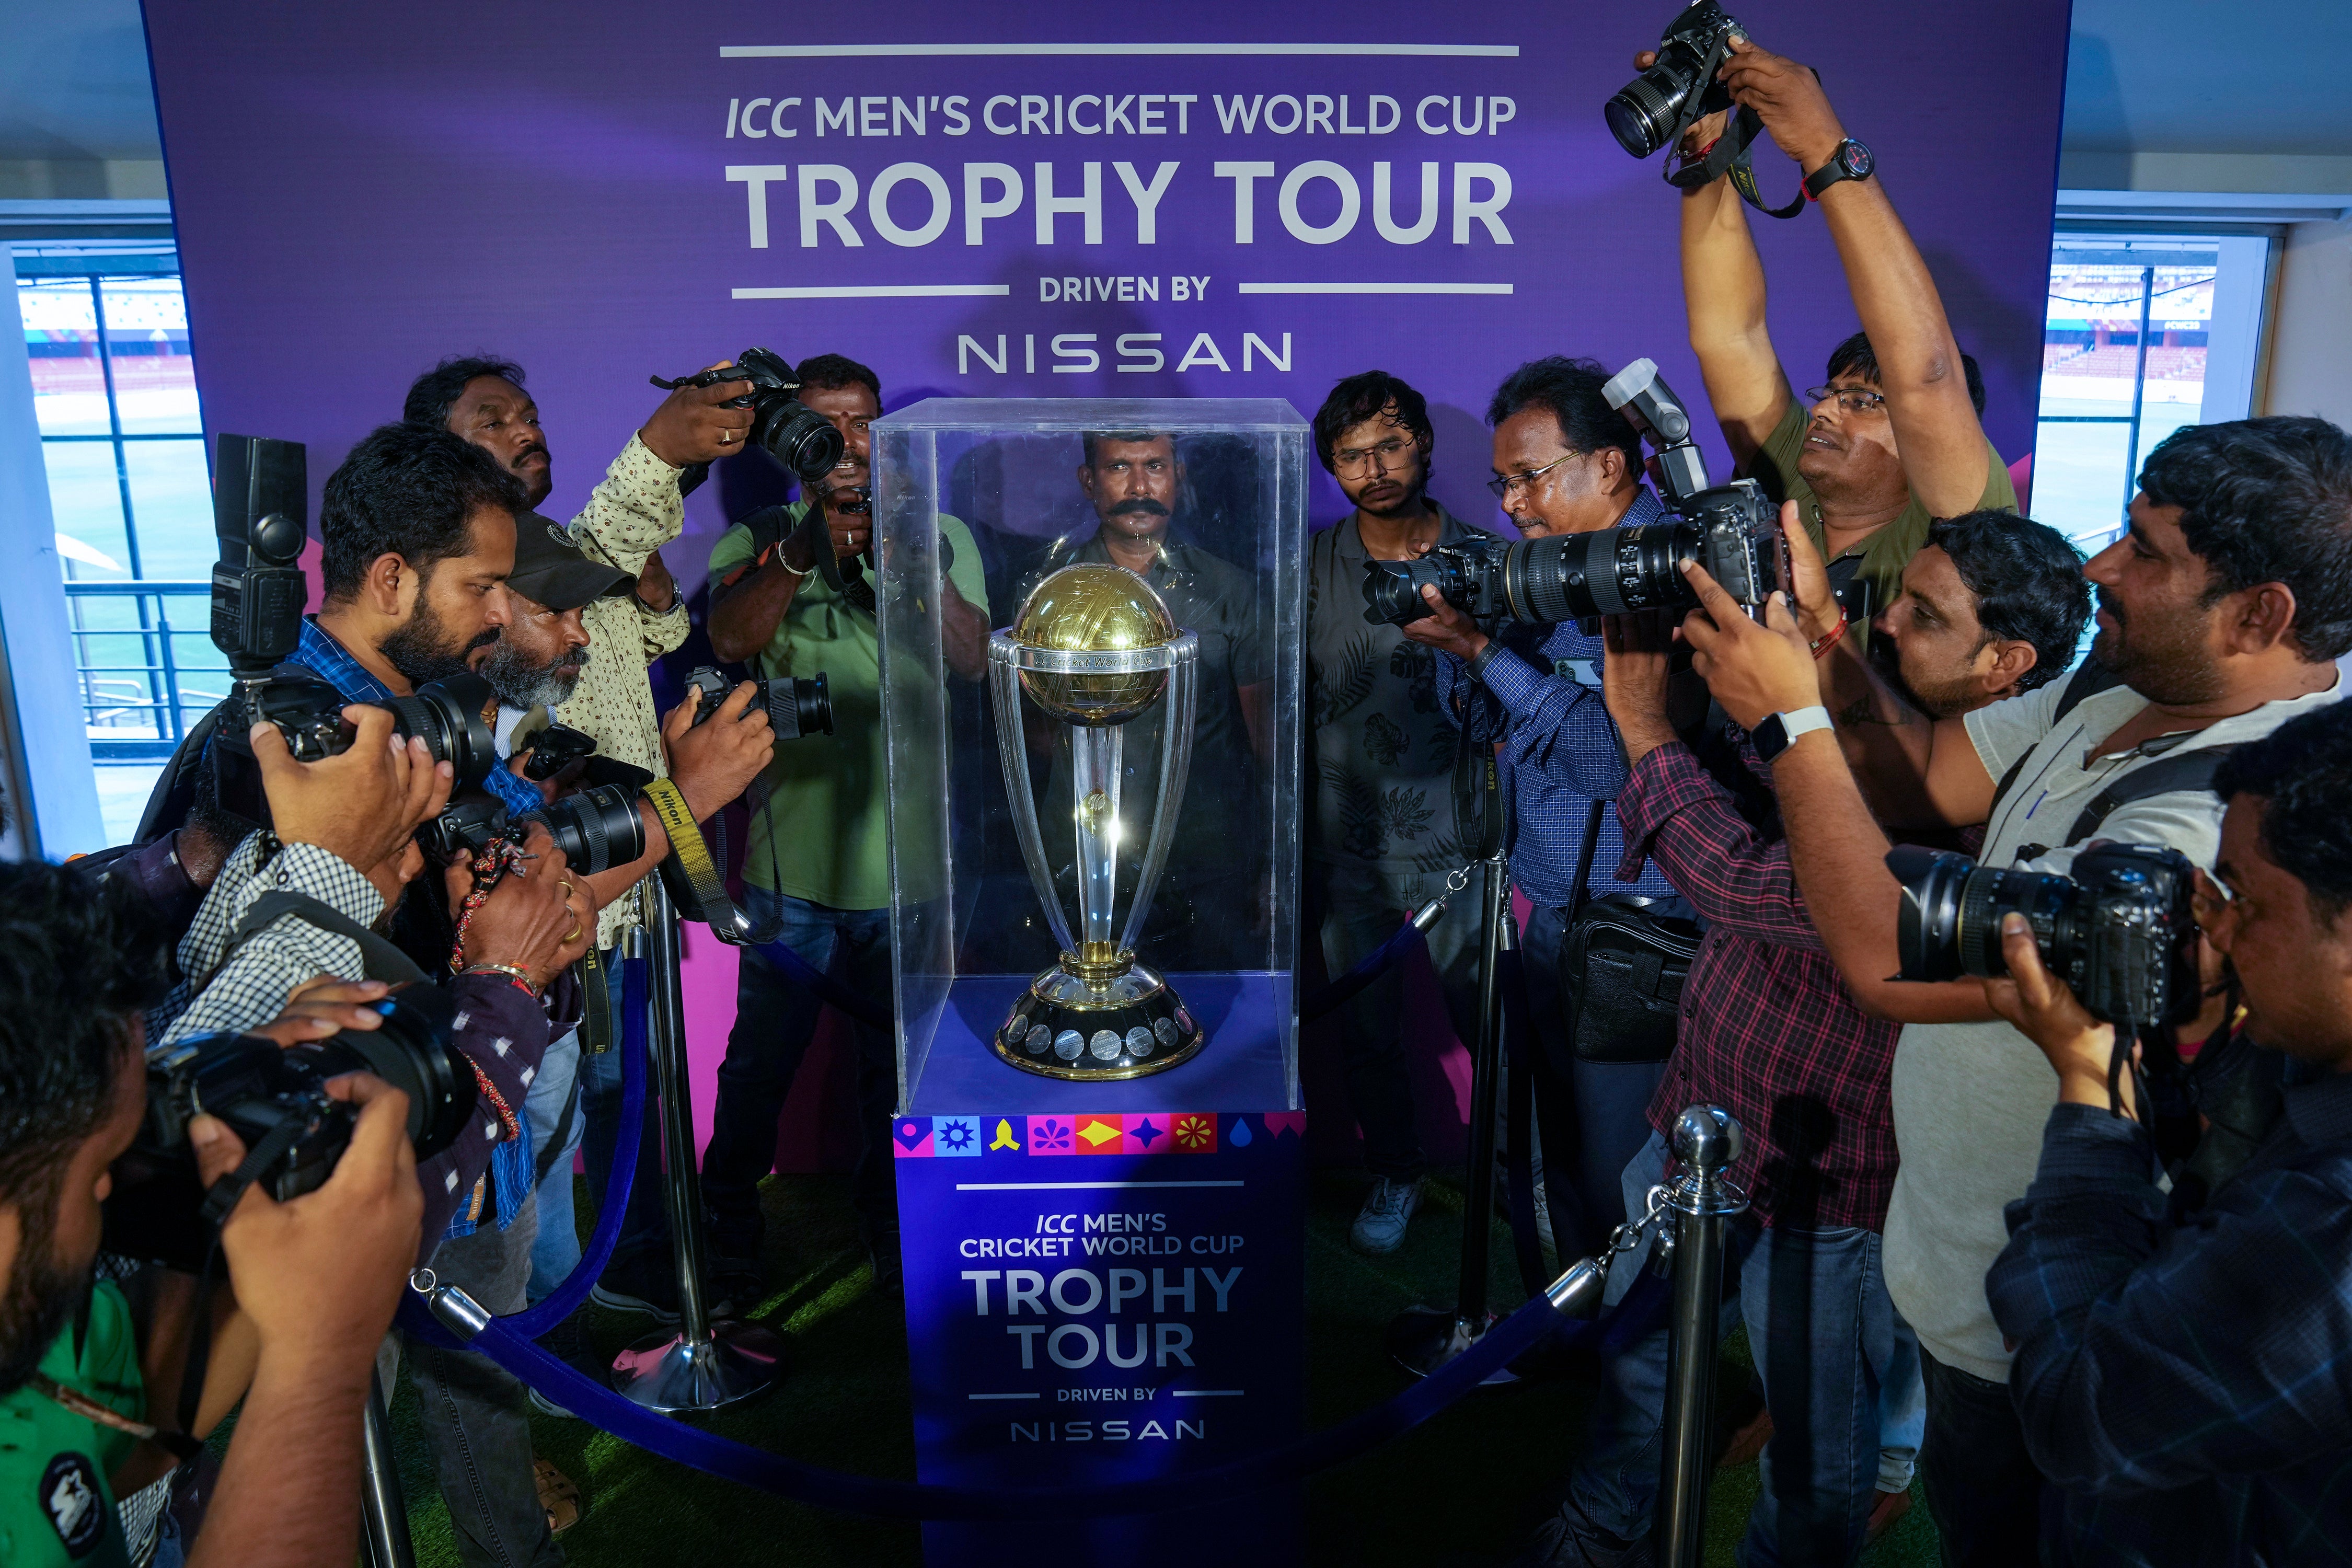 Interest has already been building in Hyderabad ahead of the ICC Cricket World Cup